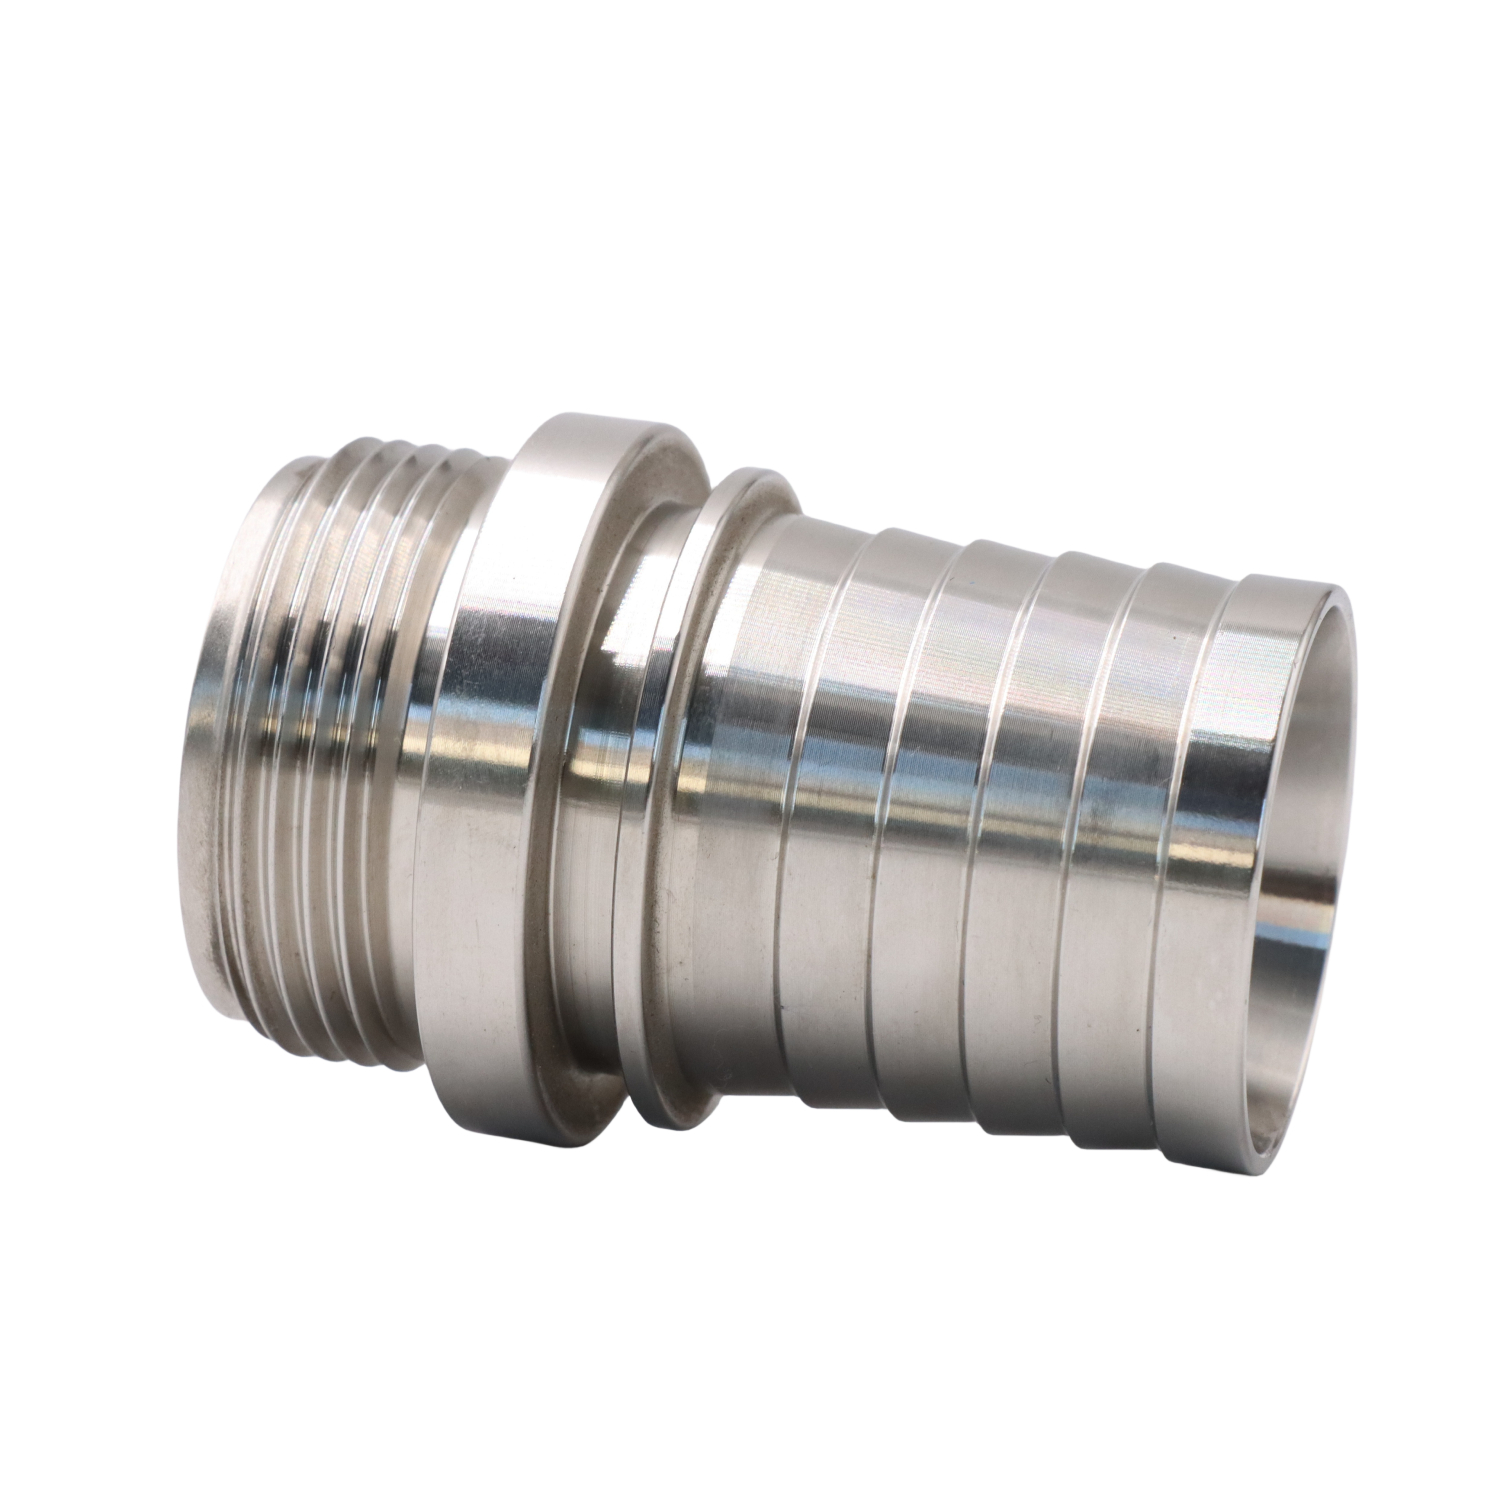 SS304 Stainless Steel Hose Coupling with Sanitary High Pressure High Quality Long DIN11864 JN-FL 23 2012 Thread Hose Adapter